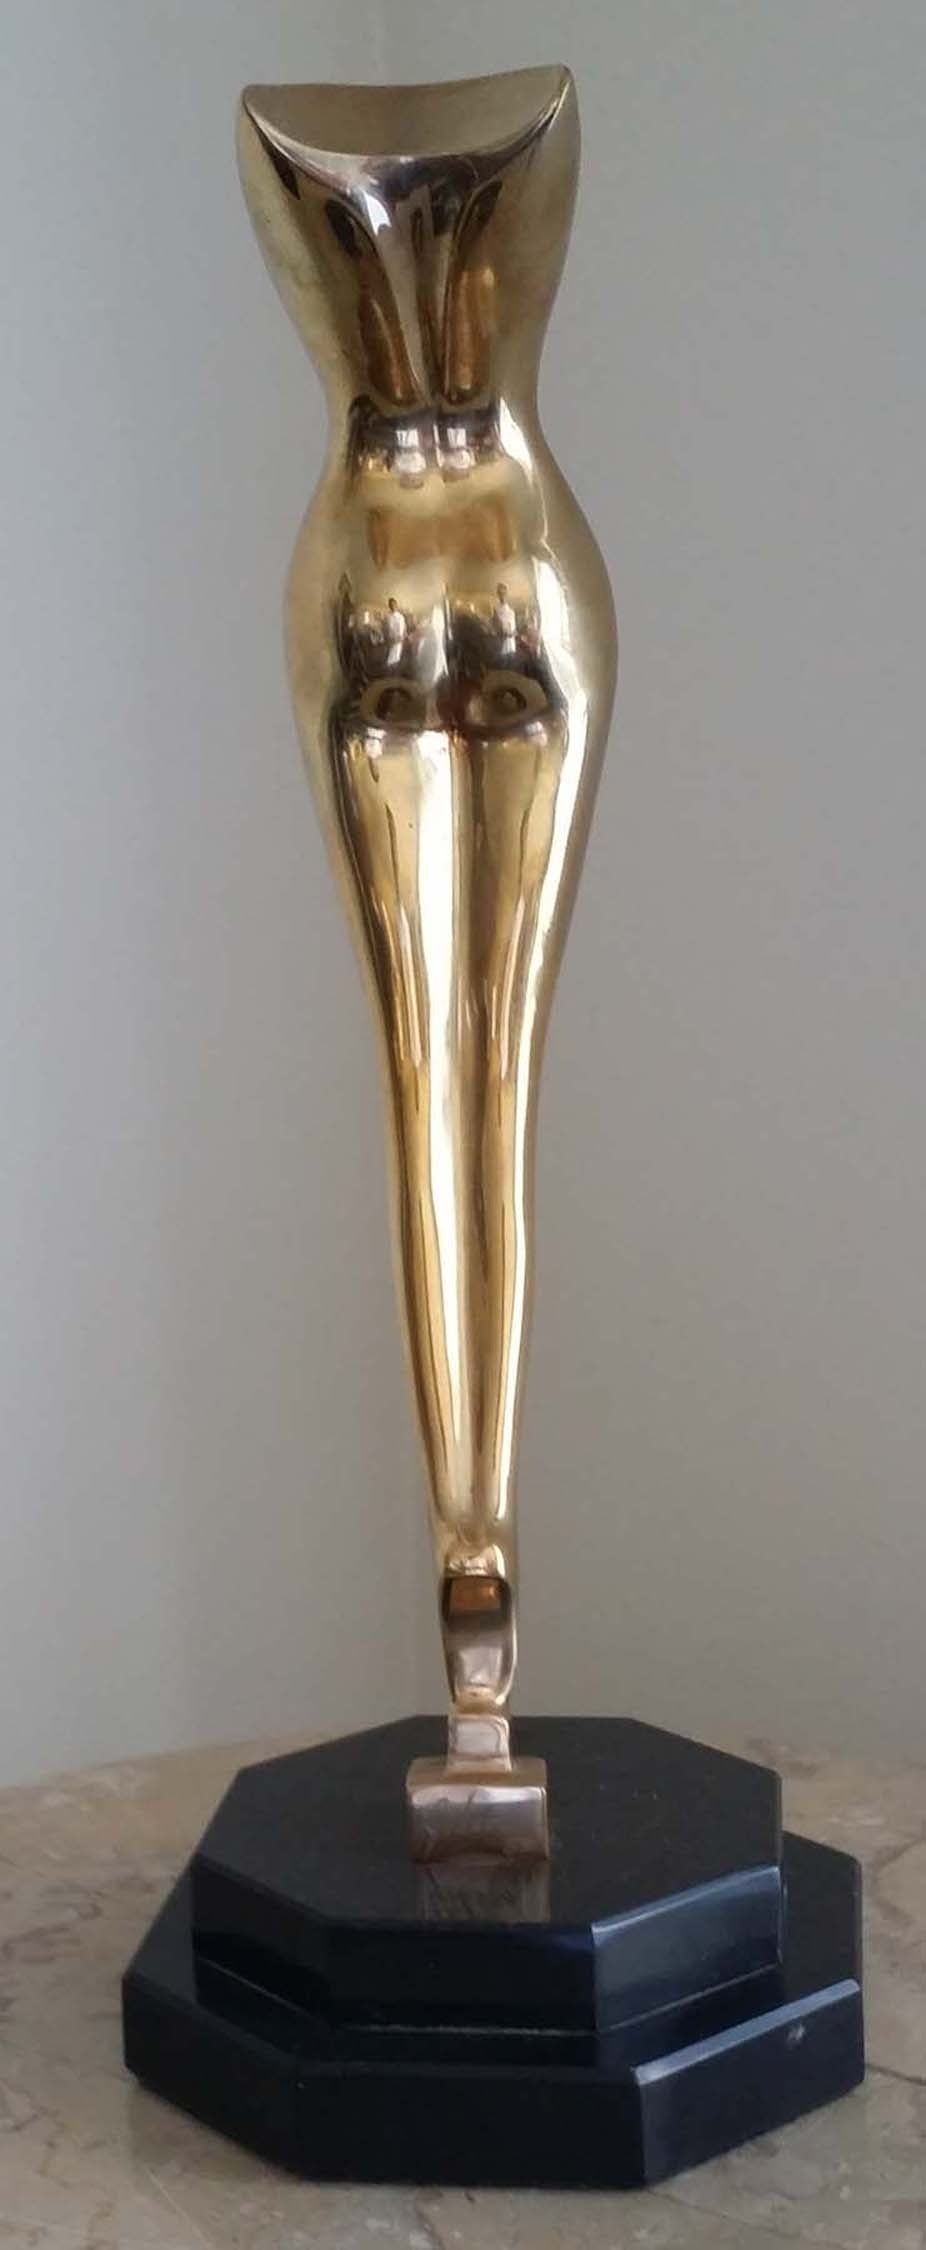 Female Nude - Gold Figurative Sculpture by James B. Gibson